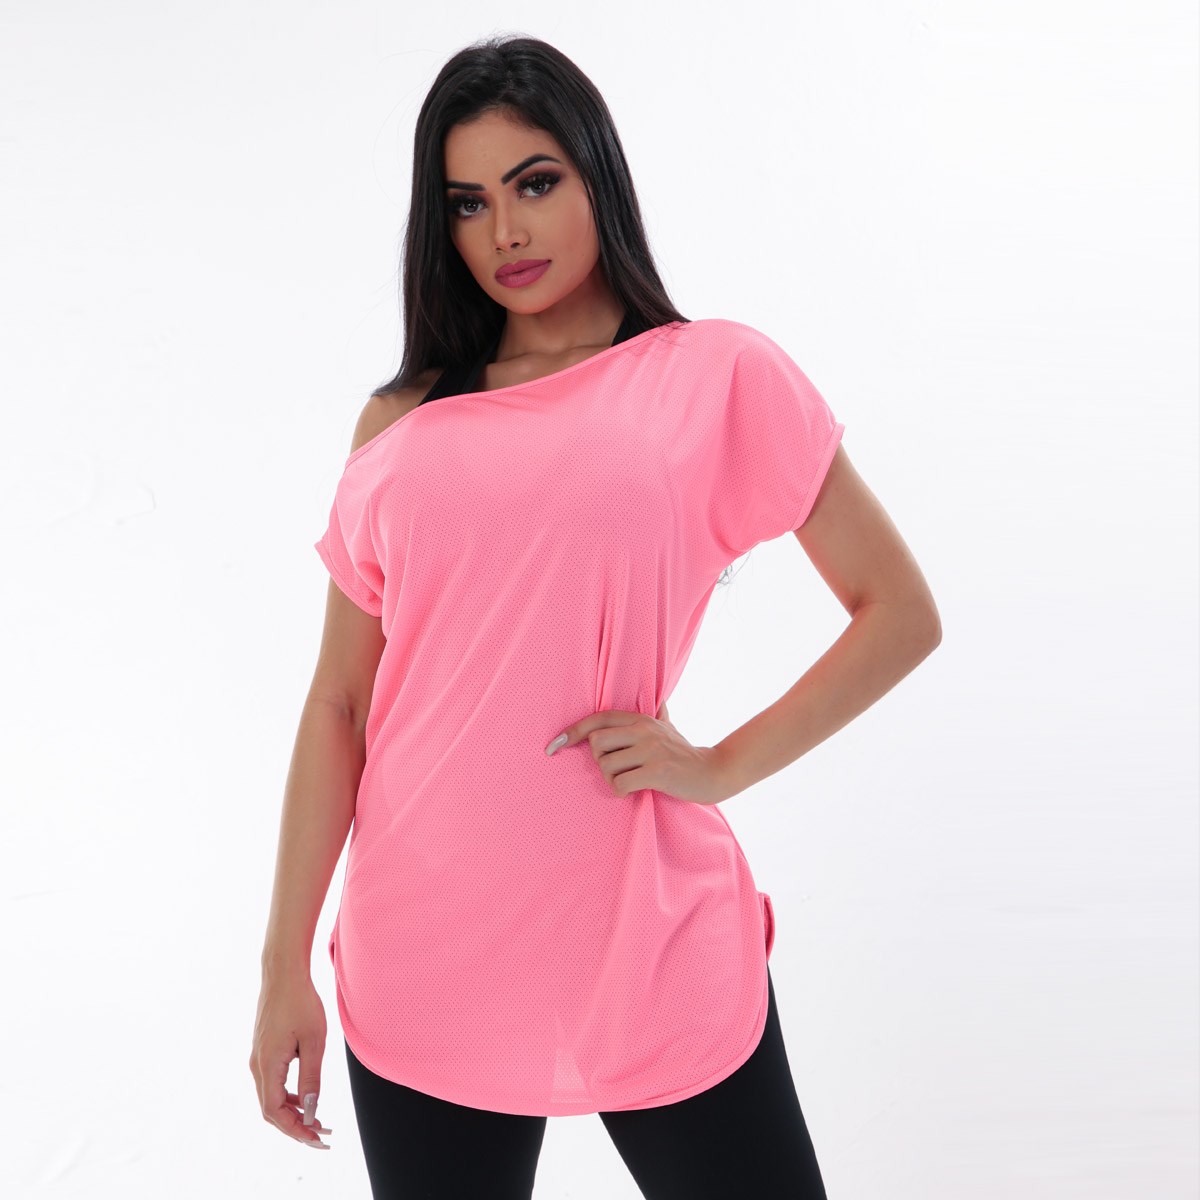 Blusa Ombro Só em Dry Fit Rosa Neon | Ref: 3.3.2434-39